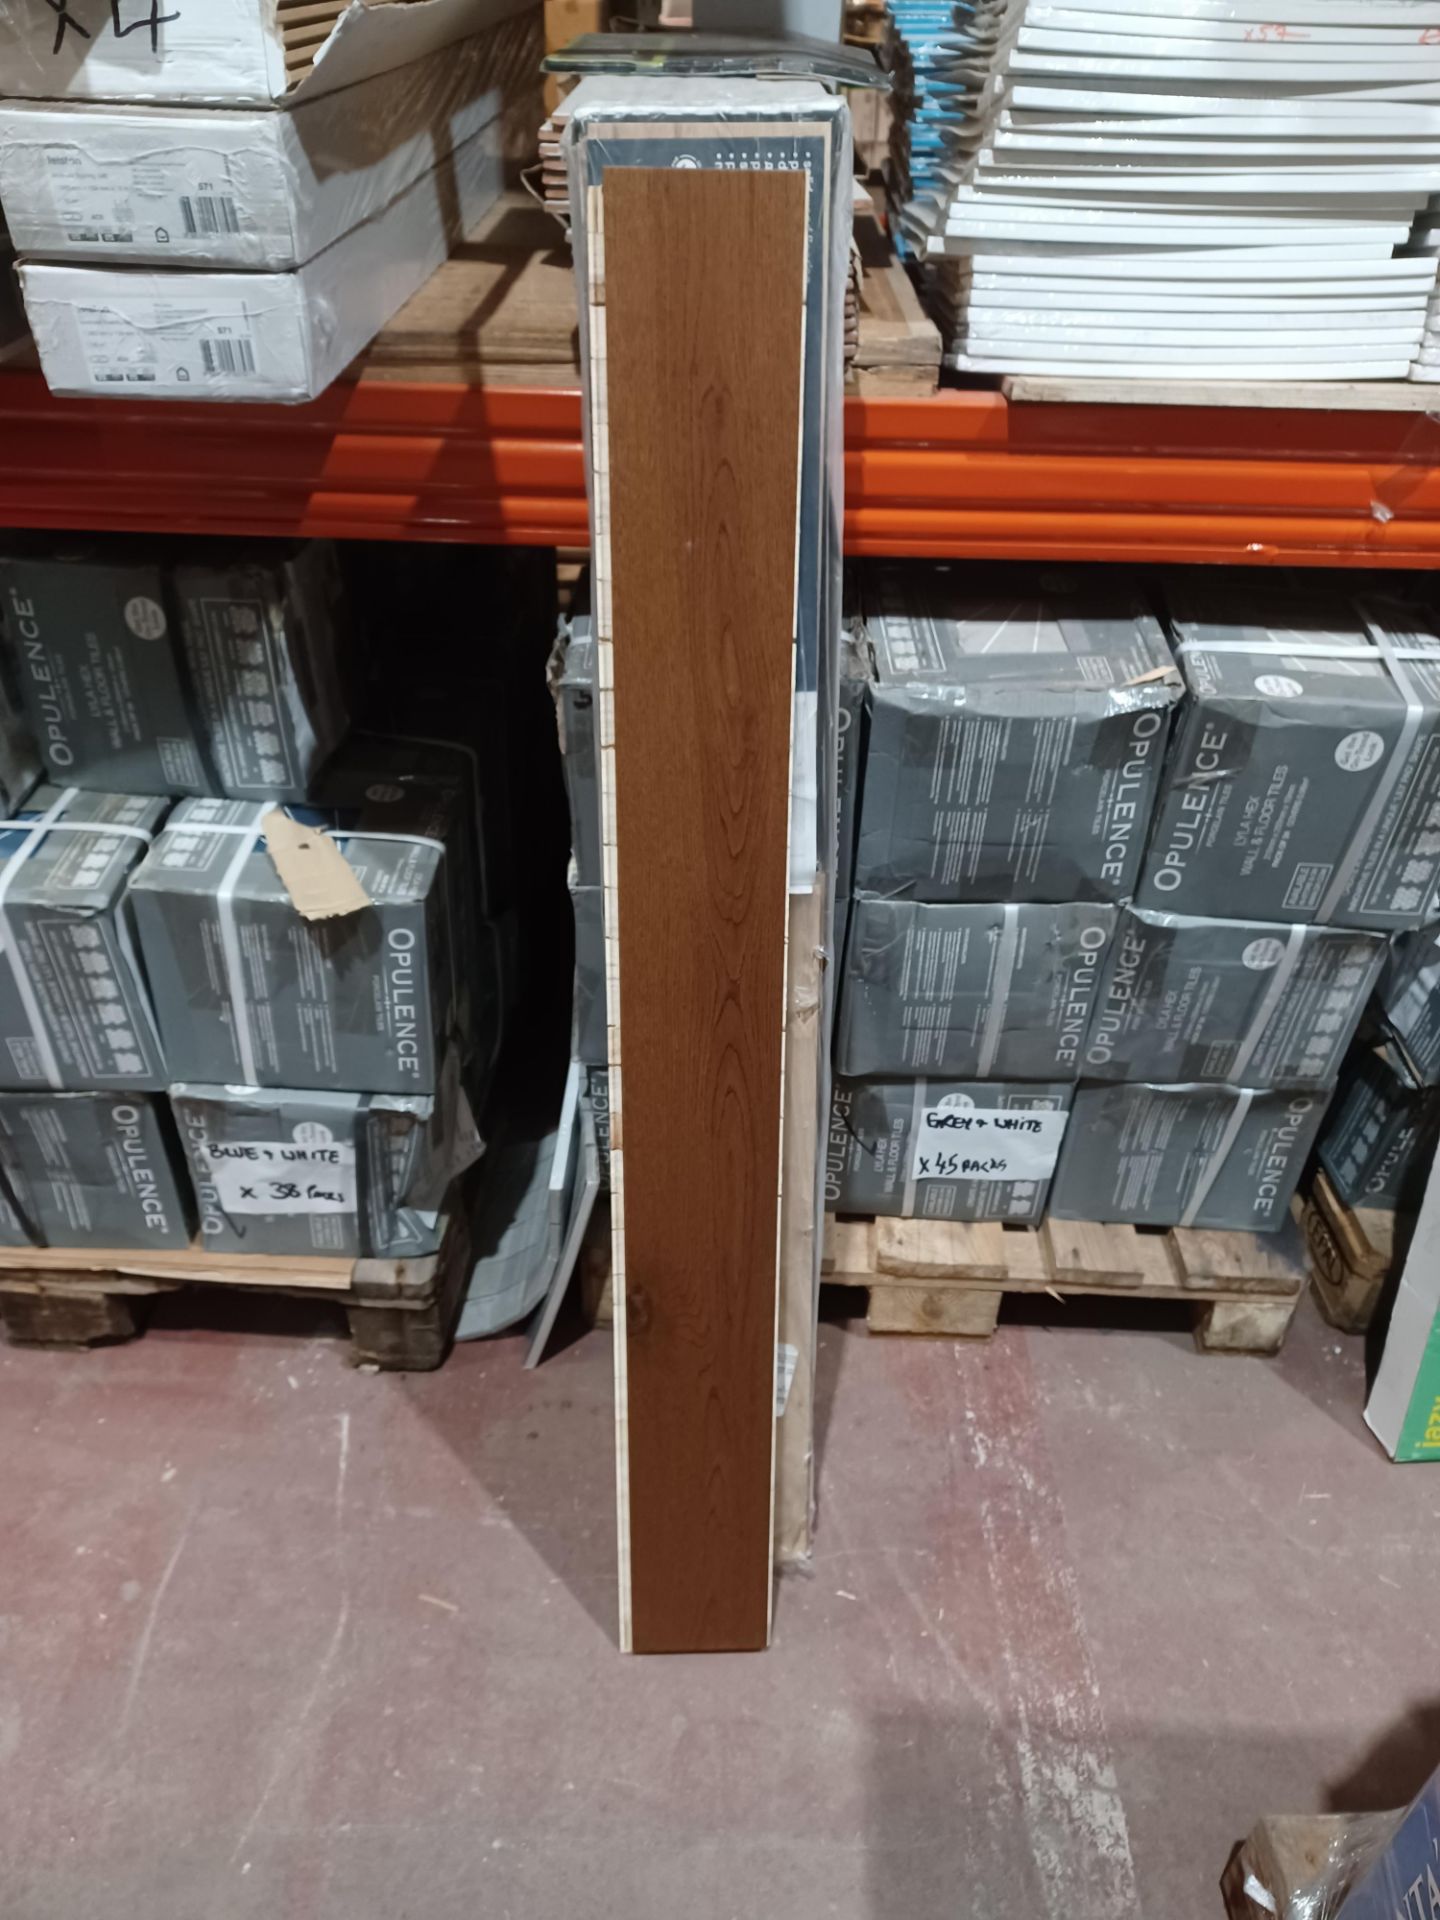 2 x Packs of Goodhome Skara Real Wood Top Layer Flooring. 1.35m2 giving this a coverage of 2.